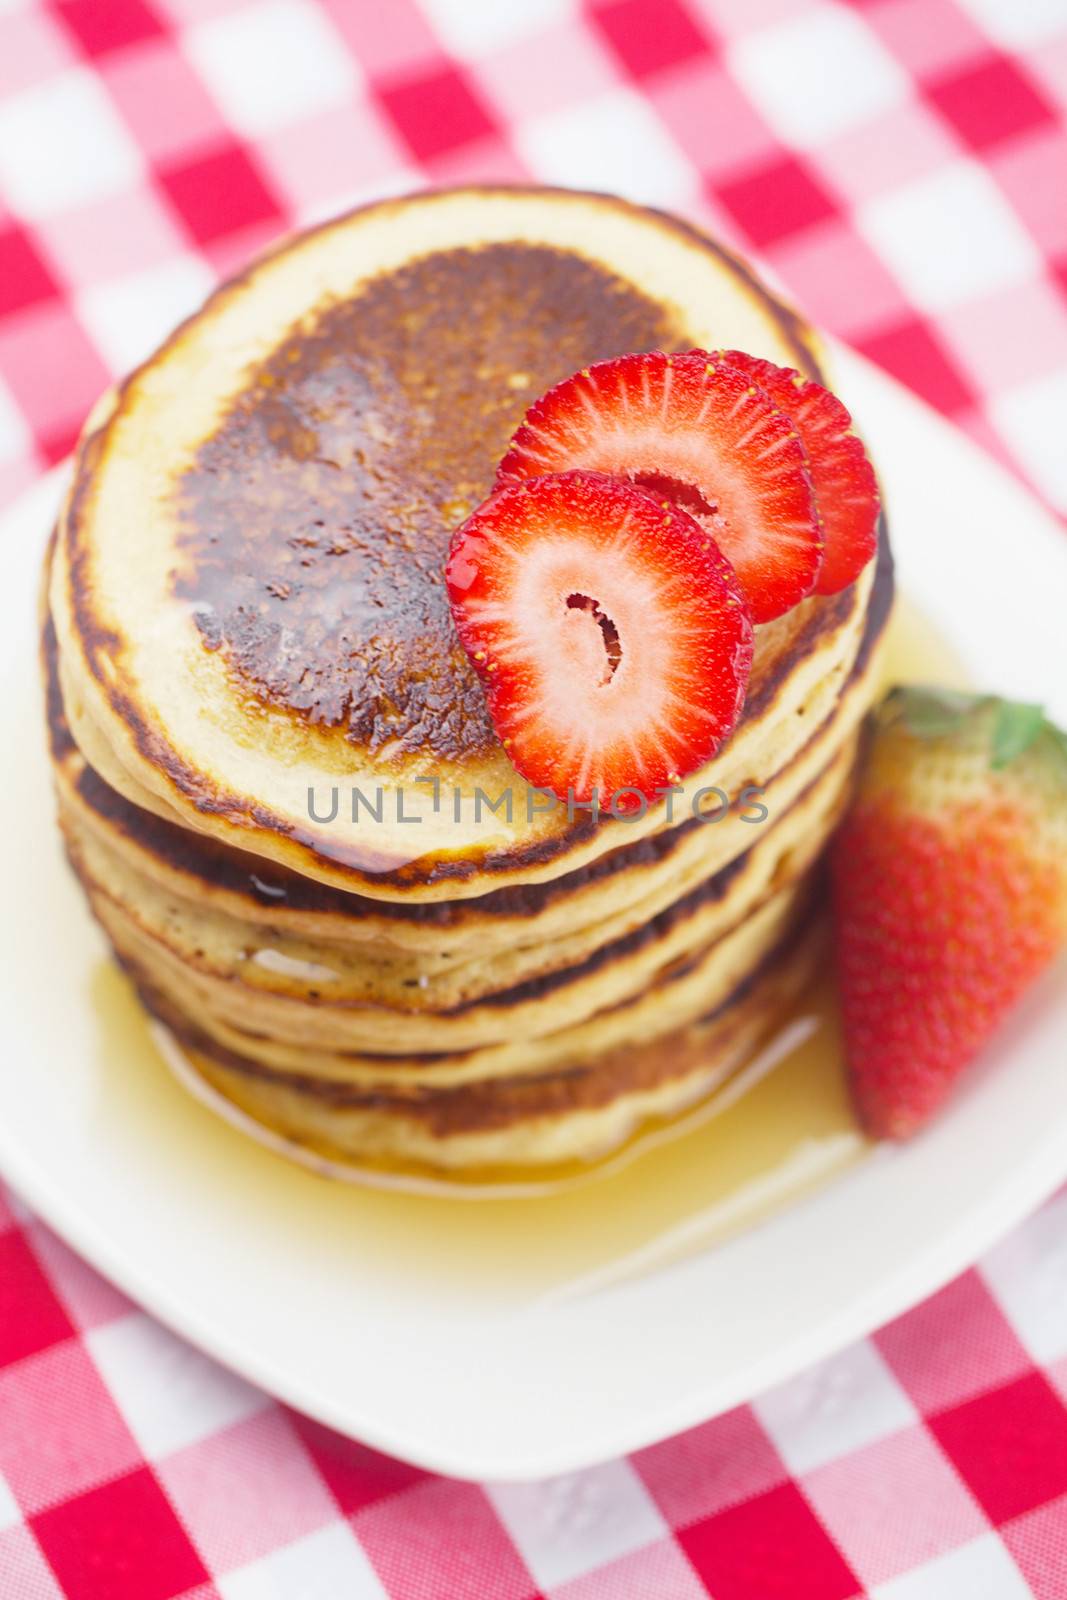 Pancakes, honey and strawberry on checkered fabric